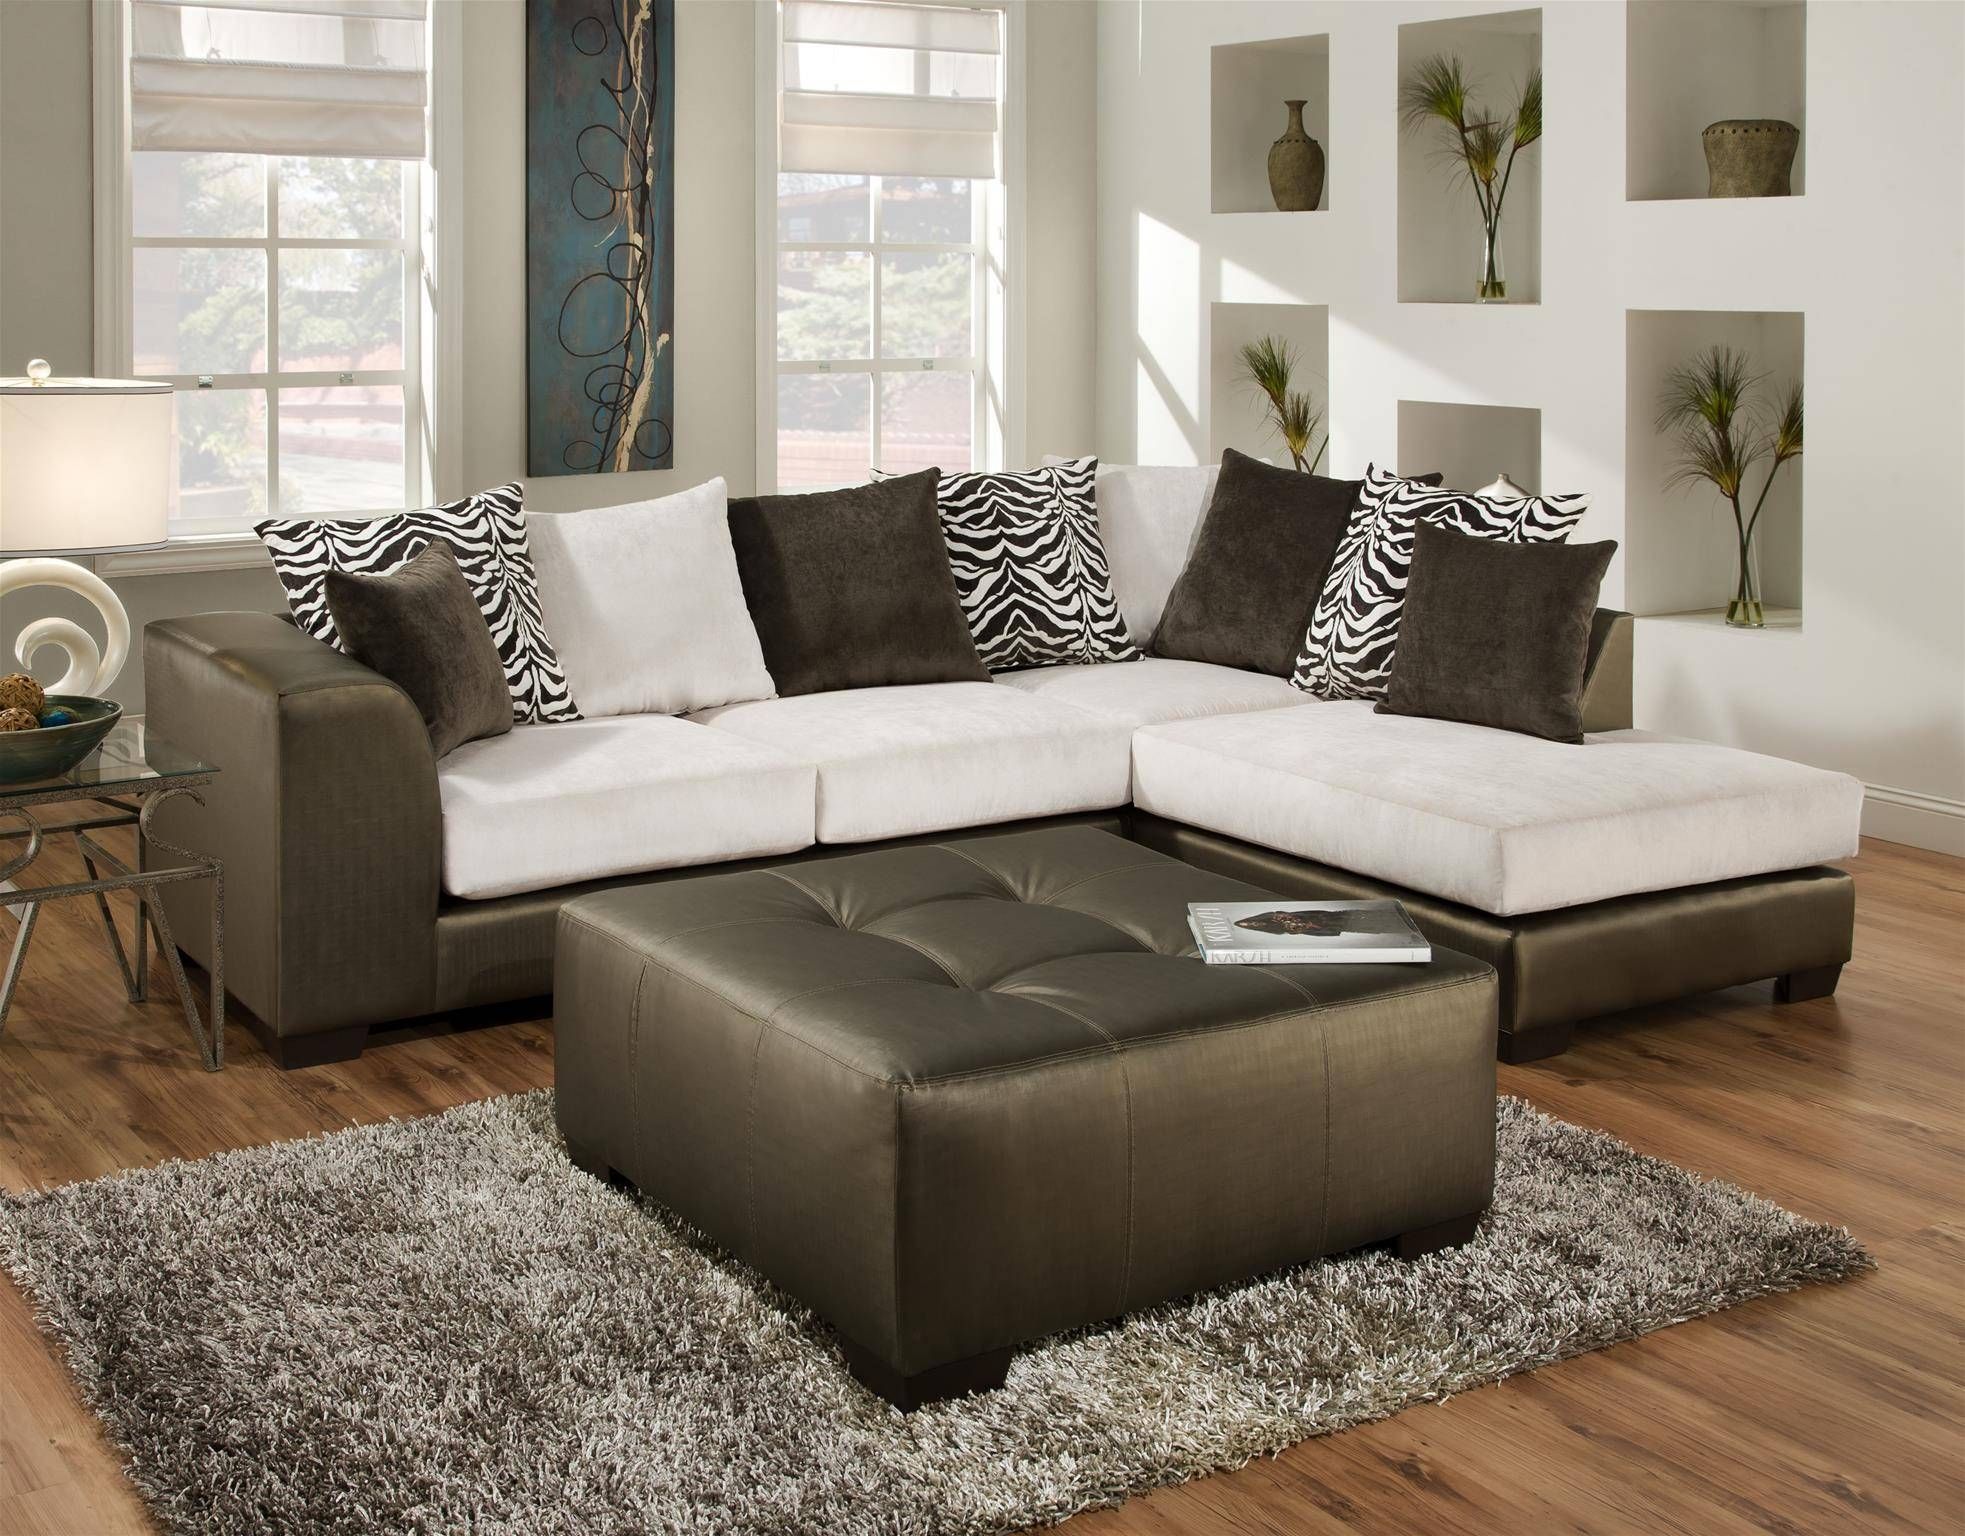 New Sectional Sofas Tampa 14 In 10 Foot Sectional Sofa With Intended For 10 Foot Sectional Sofa (Photo 122 of 299)